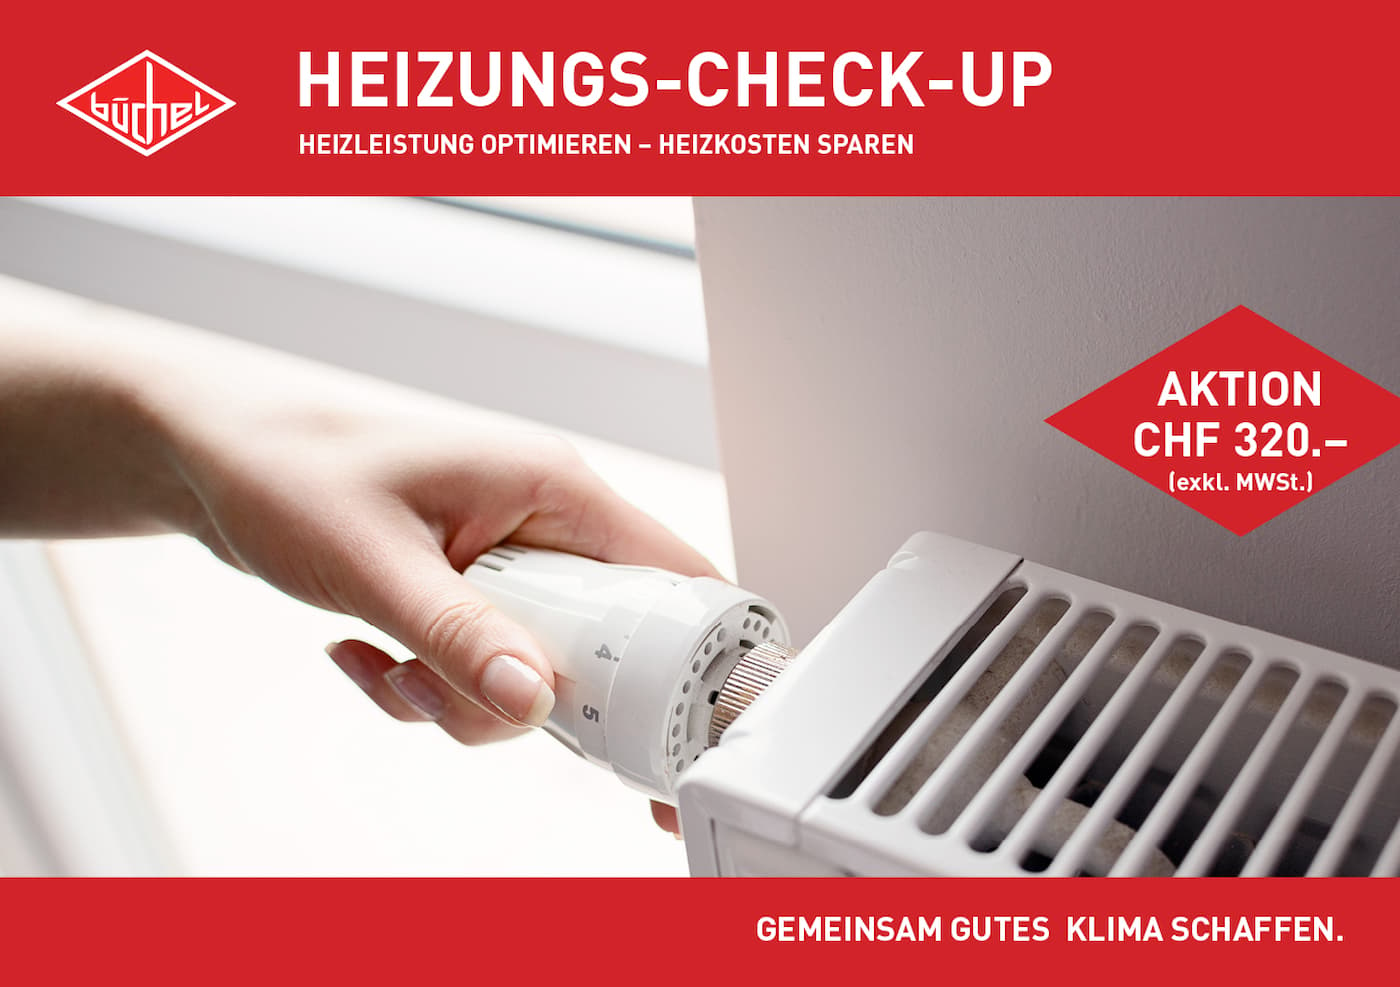 HEIZUNGS-CHECK-UP